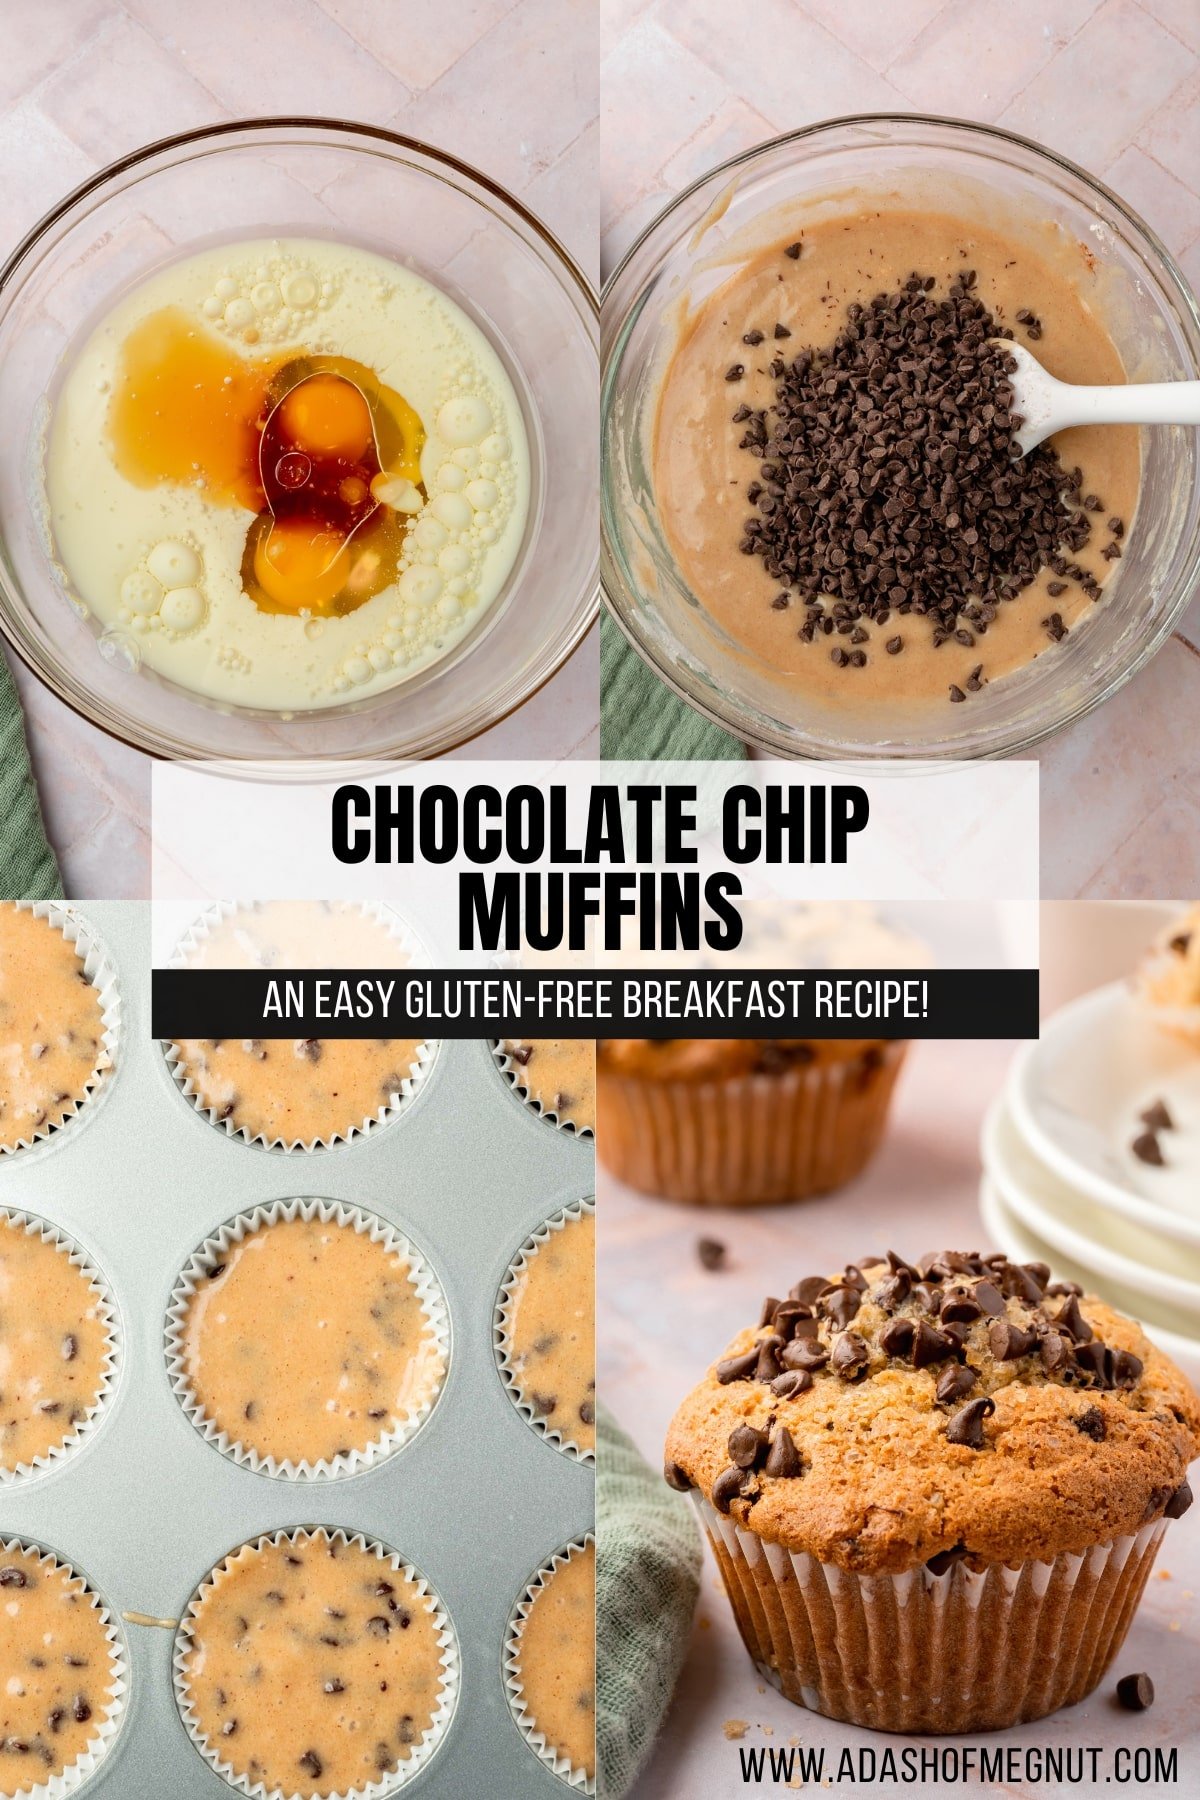 A four photo collage to show the process of baking gluten-free chocolate chip muffins. Photo 1: A glass mixing bowl with milk, oil, eggs, vanilla, before mixing together. Photo 2: Gluten-free muffin batter in a bowl with a pile of mini chocolate chips on top and a spatula. Photo 3: A closeup of muffin liners filled with gluten-free mini chocolate chip muffin batter before baking. Photo 4: A close up of a single gluten-free chocolate chip muffin with mini chocolate chips on top.